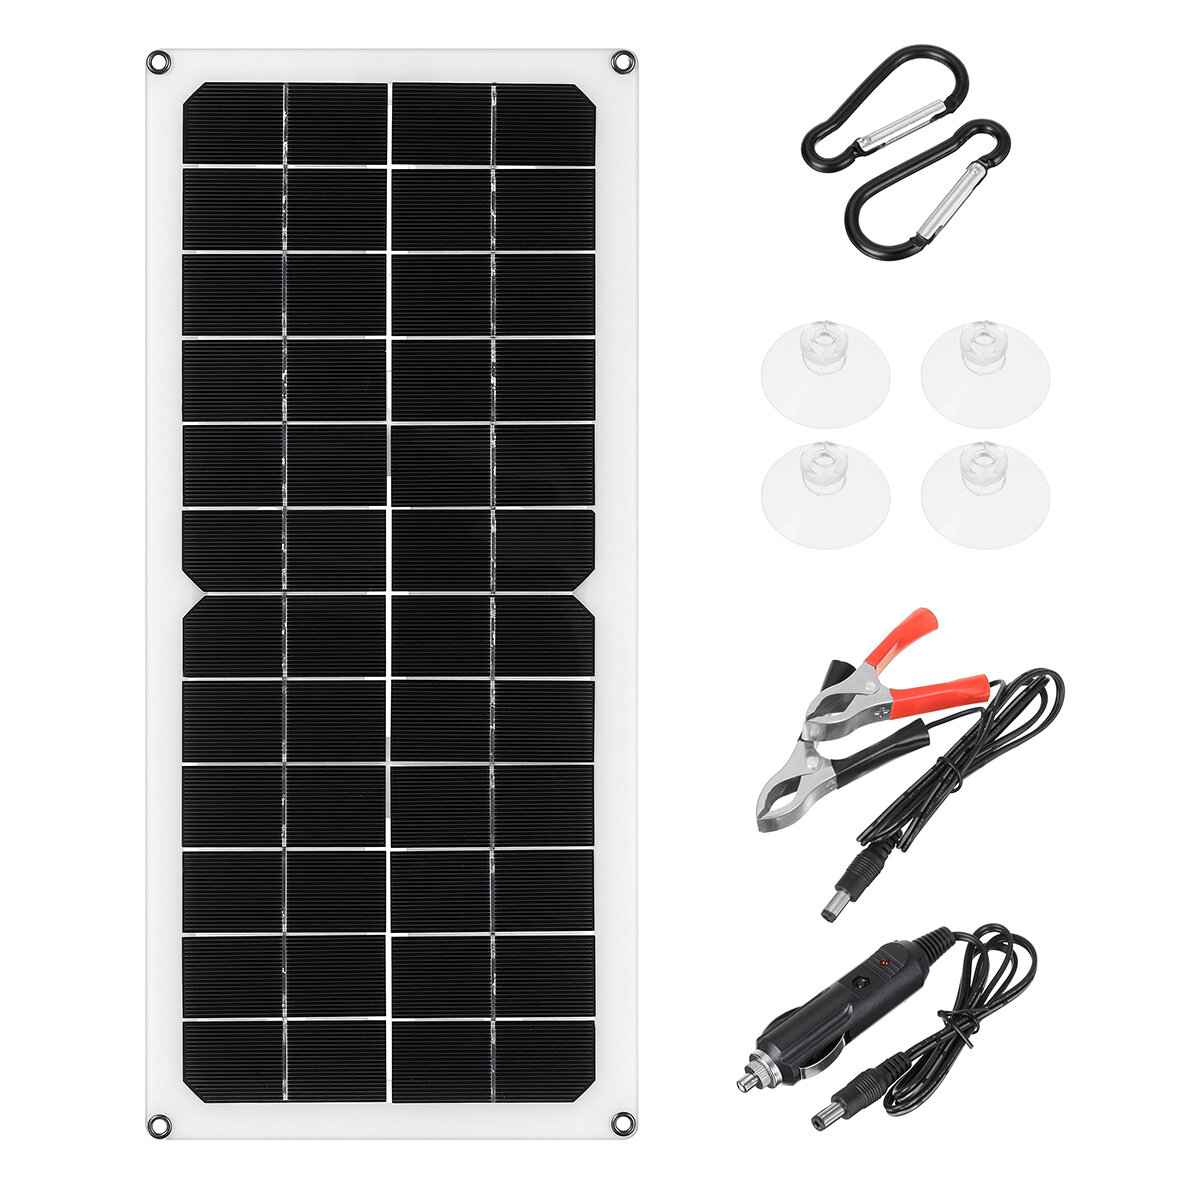 30W 12V Solar Panel DC 5V USB Power Battery Charger Portable Outdoor Camping Travel